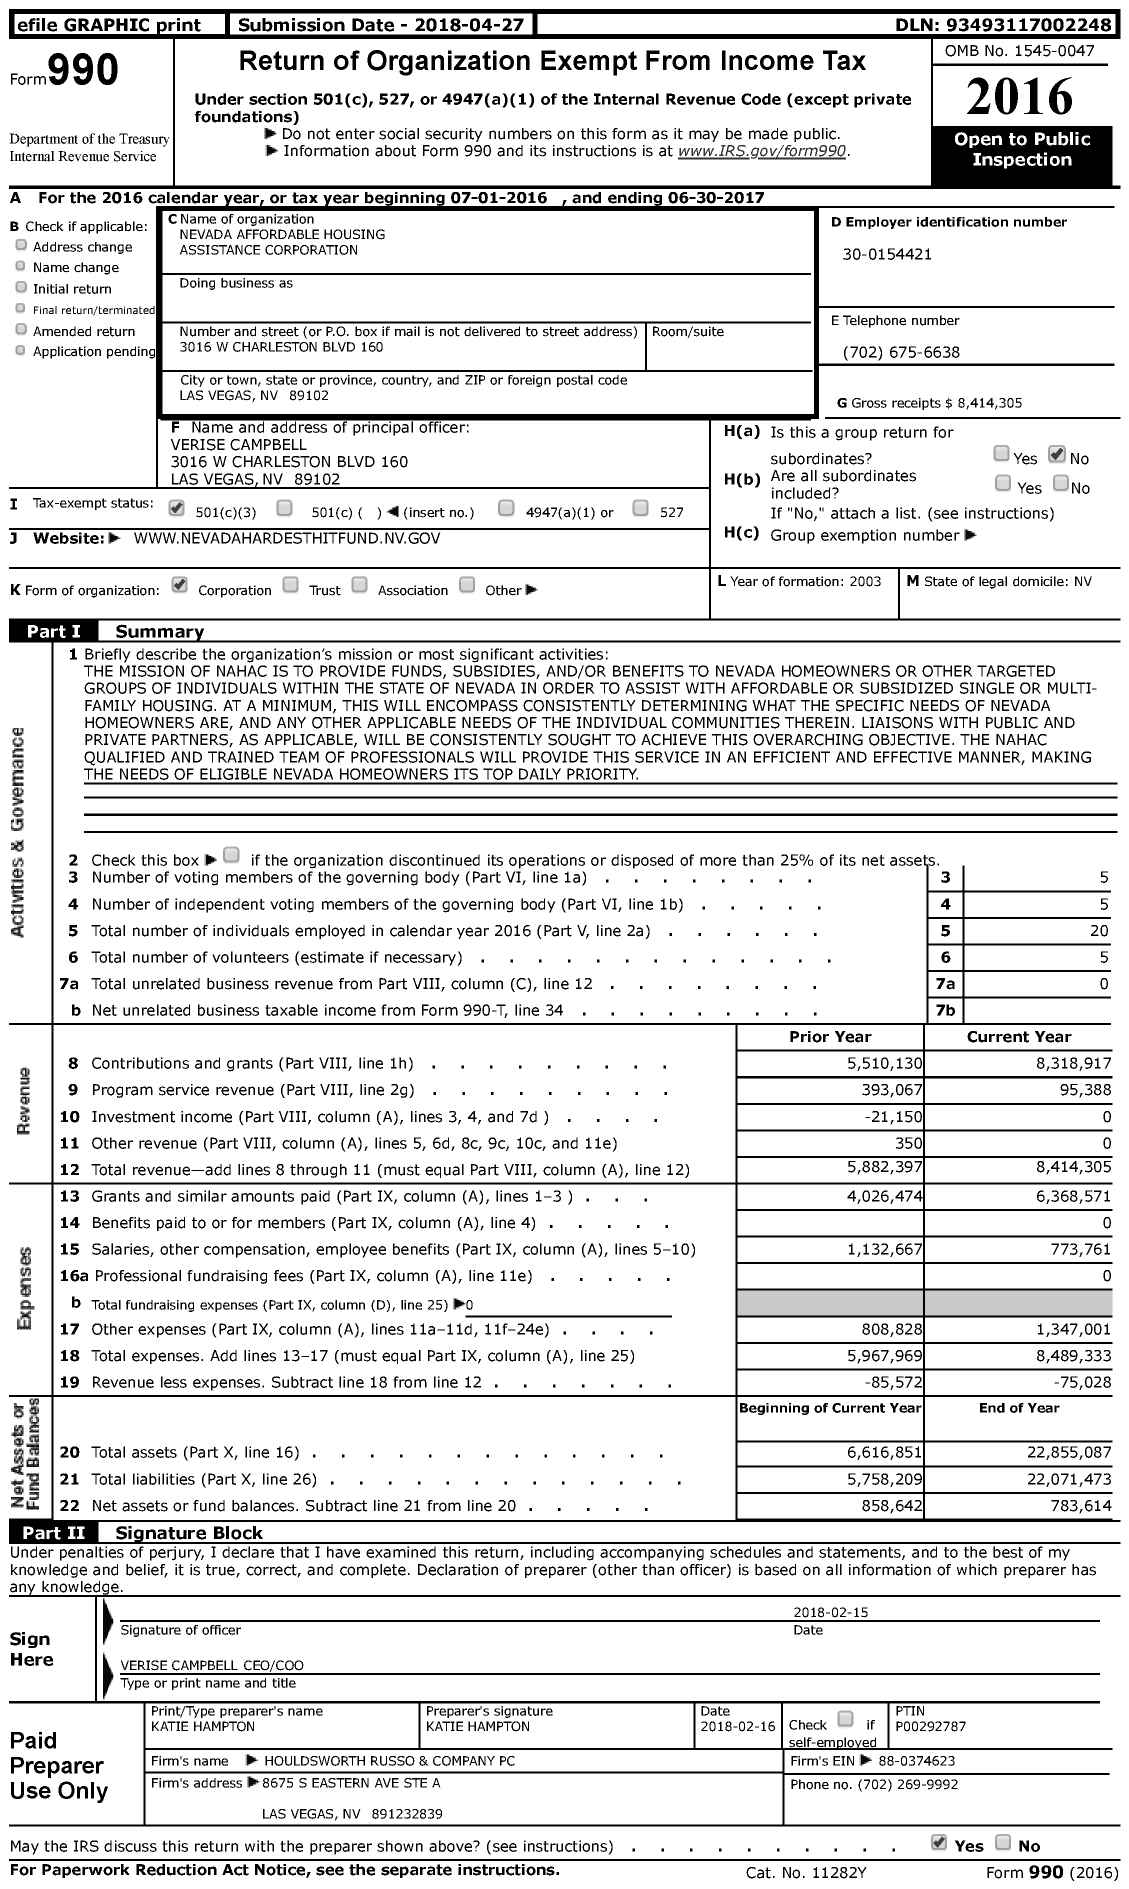 Image of first page of 2016 Form 990 for Nevada Affordable Housing Assistance Corporation (NAHAC)